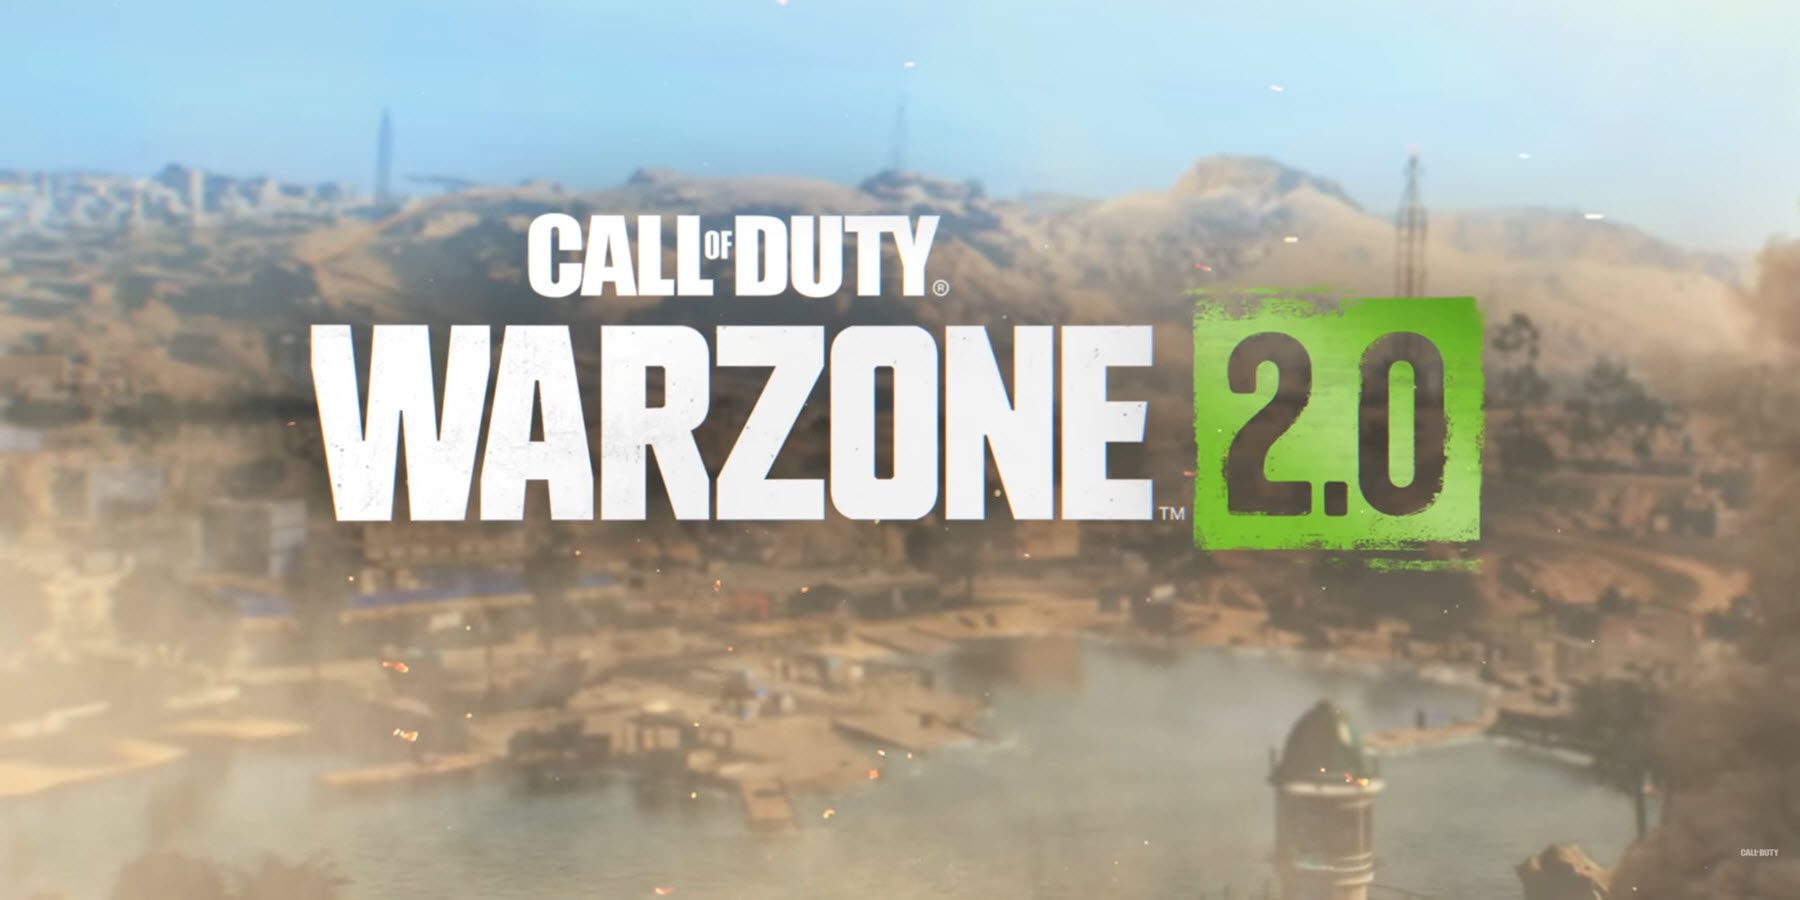 call of duty warzone 2 launch trailer